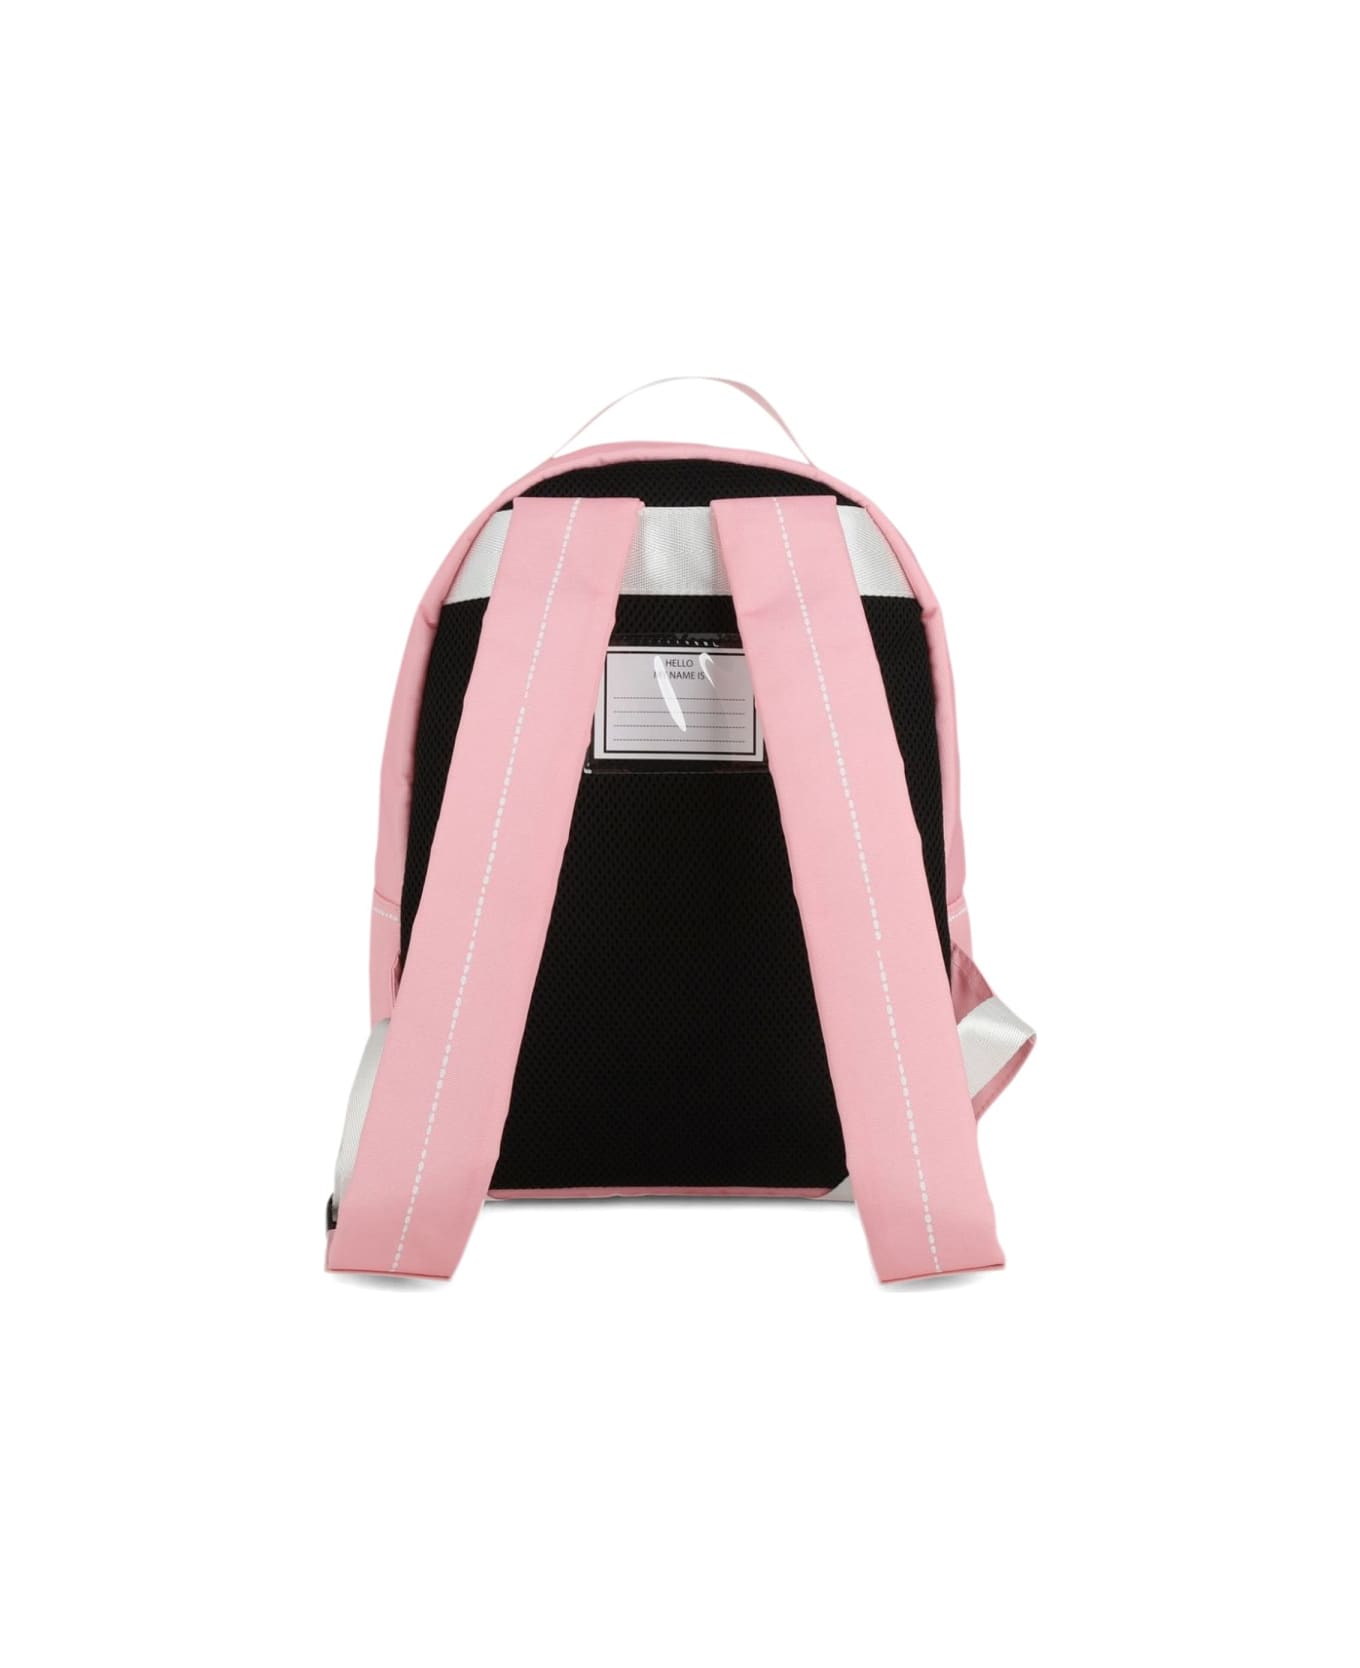 Marc Jacobs Backpack - PINK アクセサリー＆ギフト